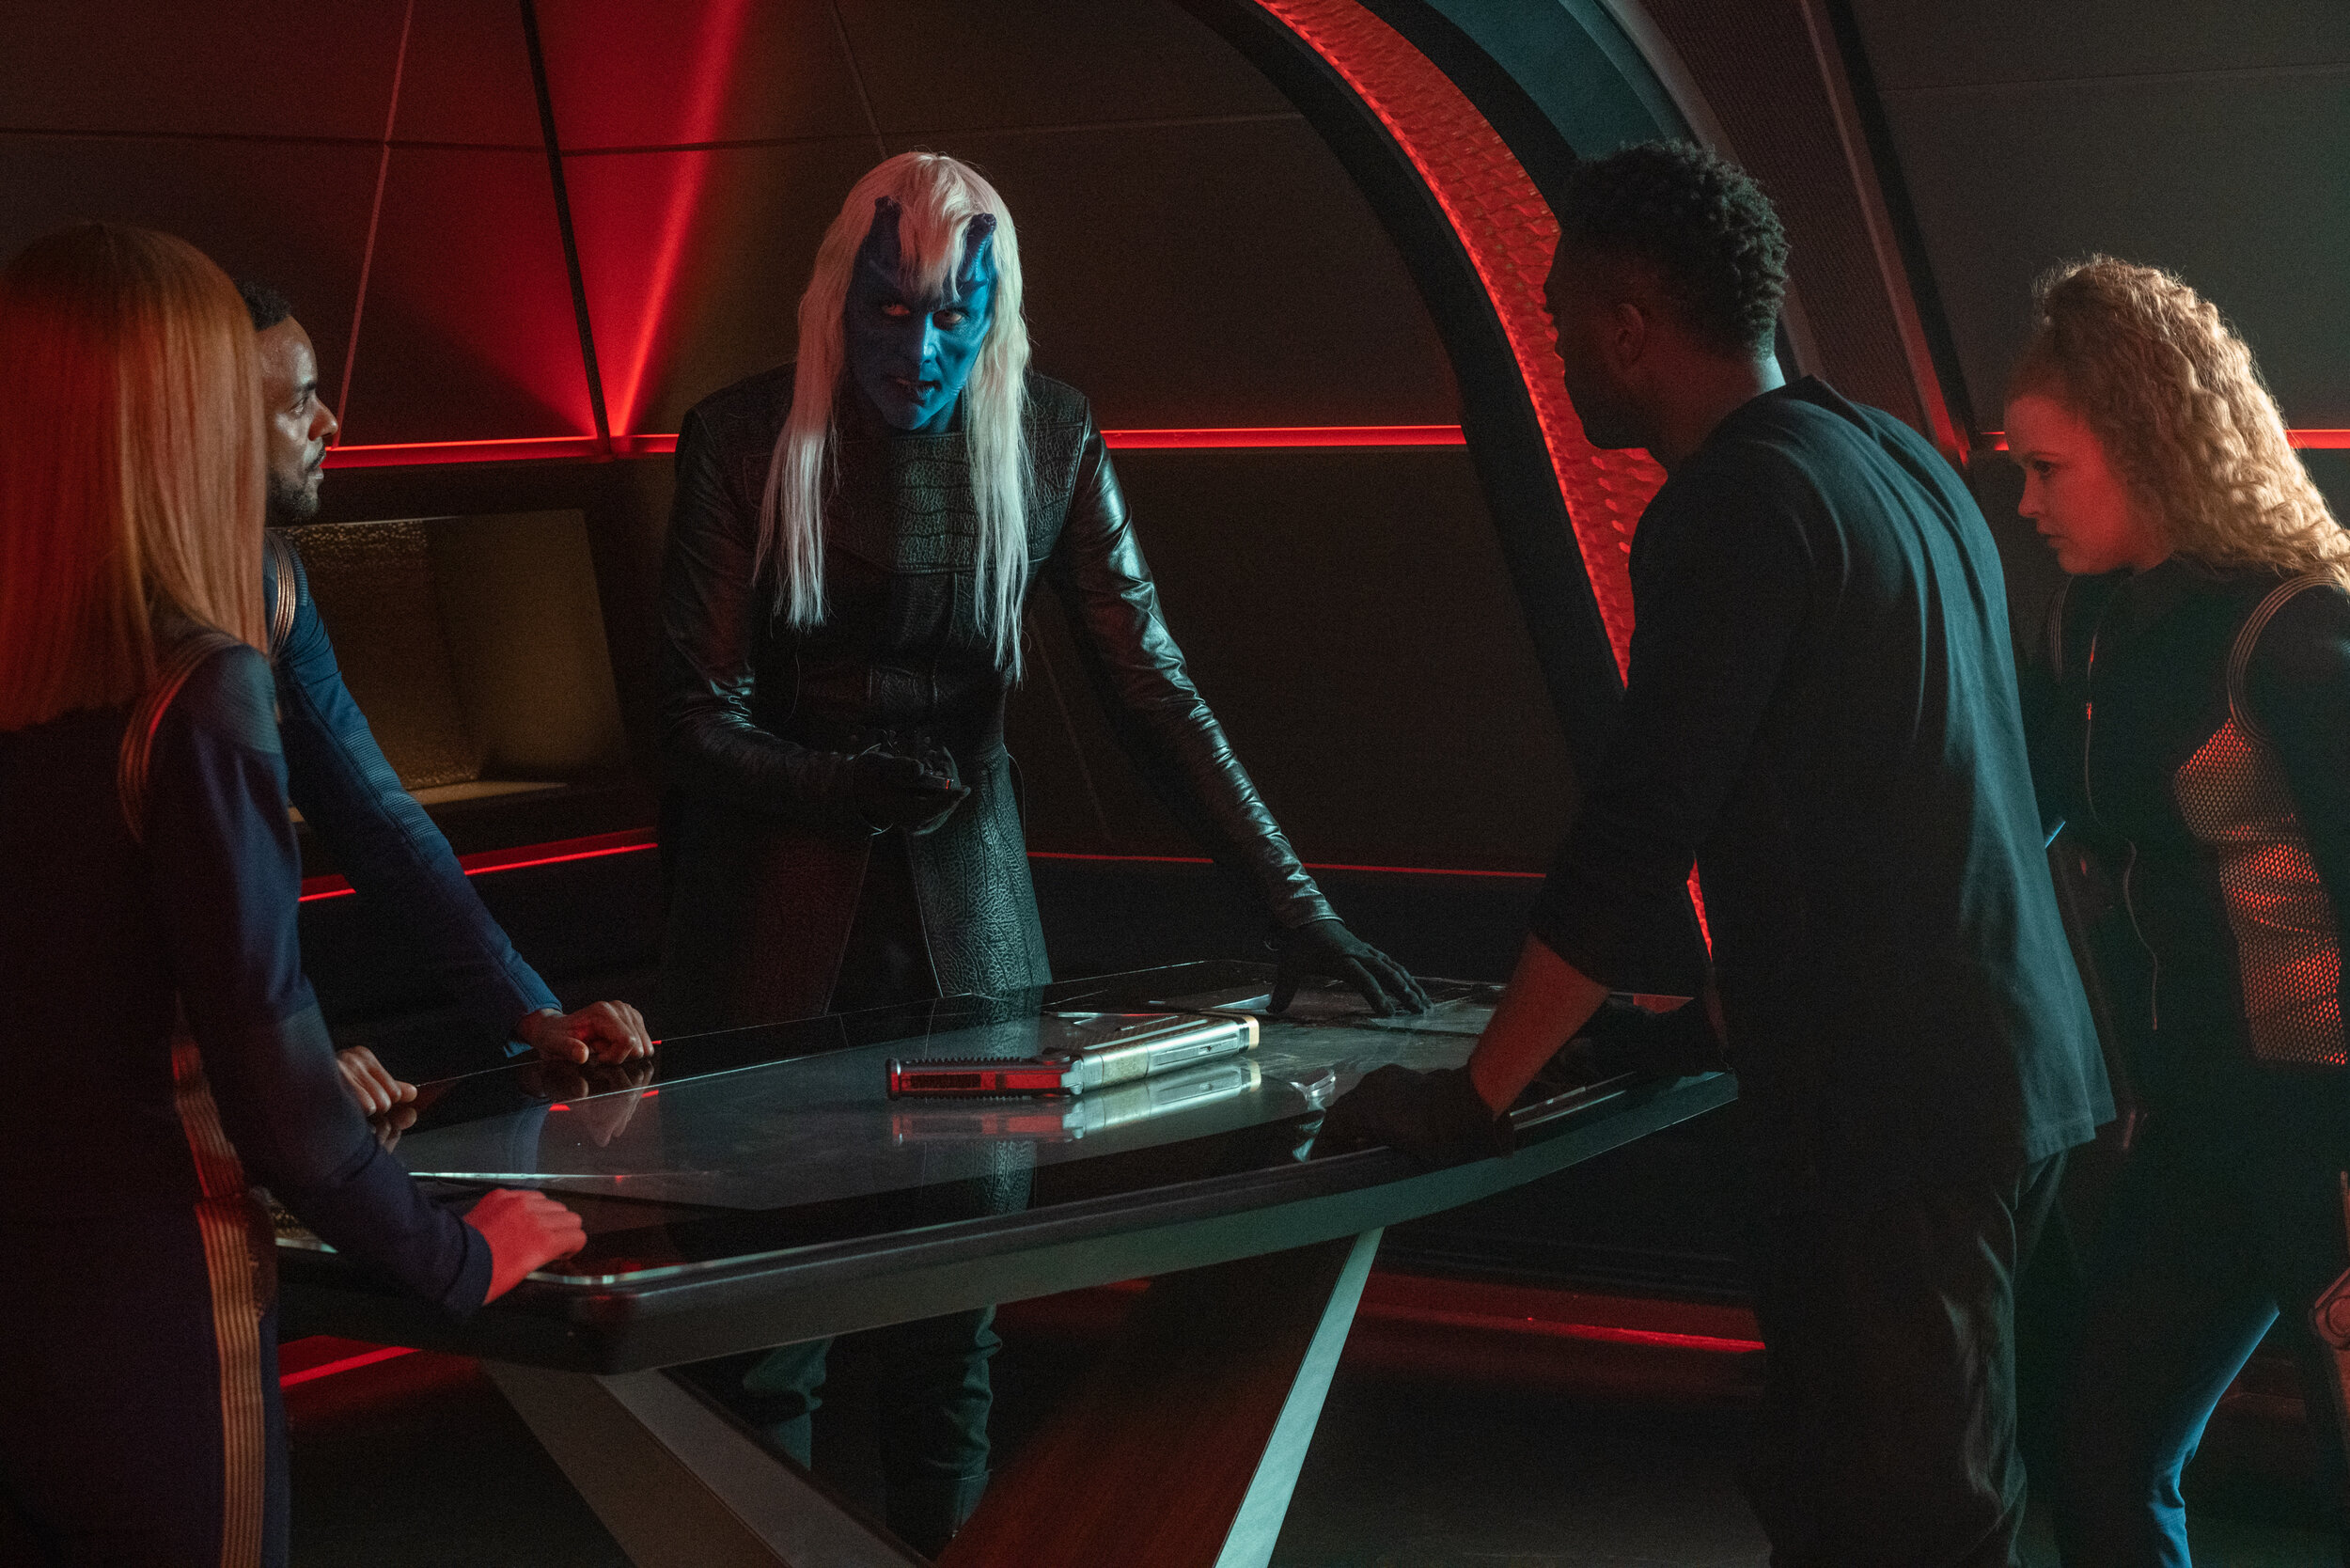   "There Is A Tide..." -- Ep#312 -- Pictured (L-R): Emily Coutts as Lt. Keyla Detmer, Ronnie Rowe Jr as Lt. Bryce, Noah Averbach-Katz as Ryn, David Ajala as Book and Mary Wiseman as Ensign Silvia Tilly of the CBS All Access series STAR TREK: DISCOVER